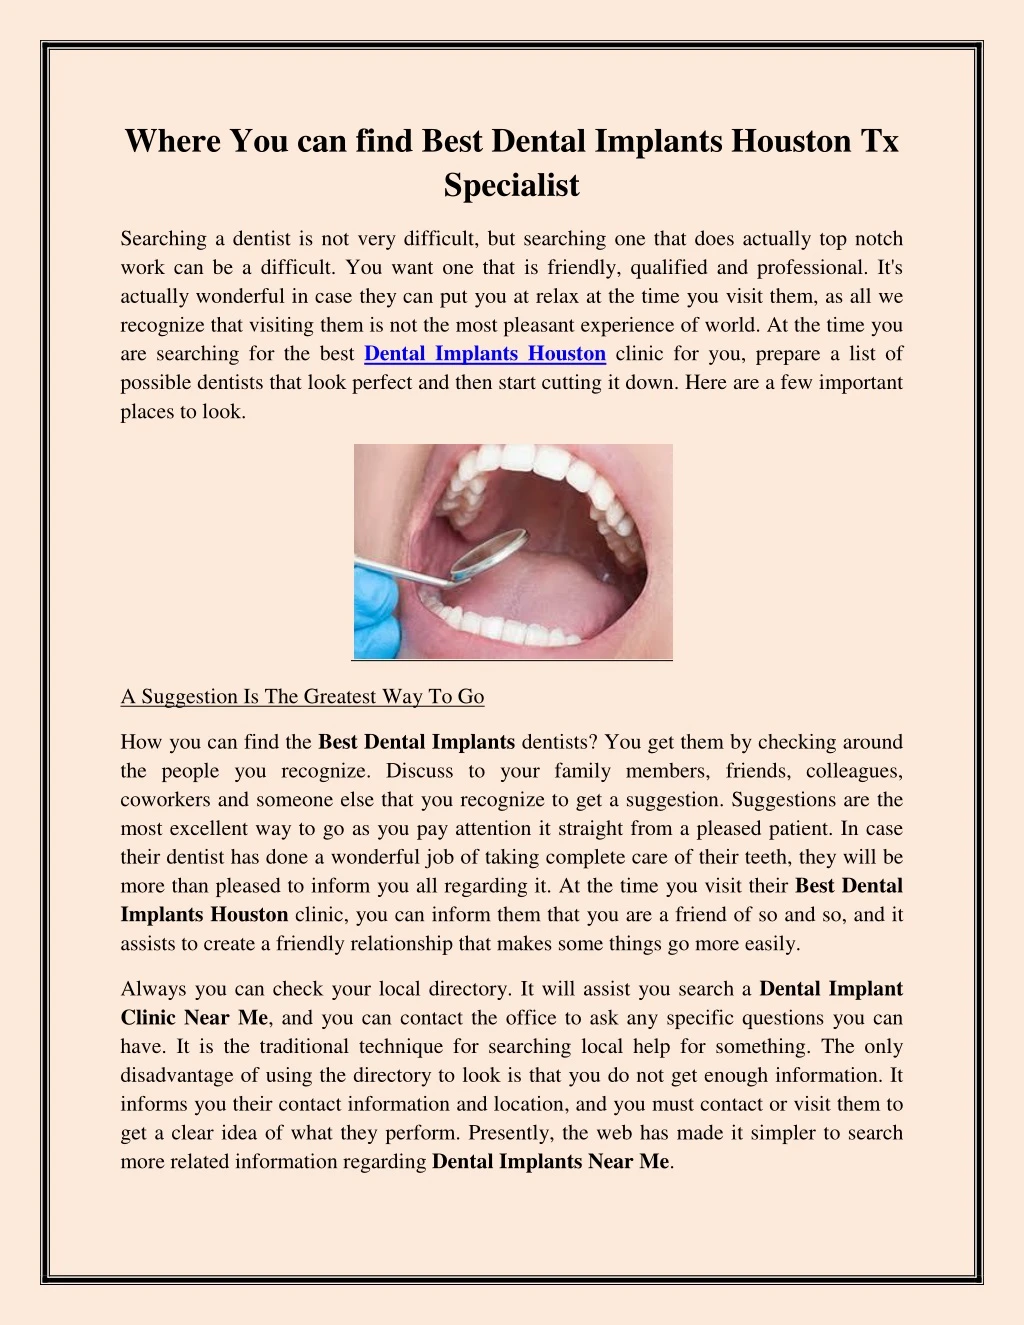 where you can find best dental implants houston